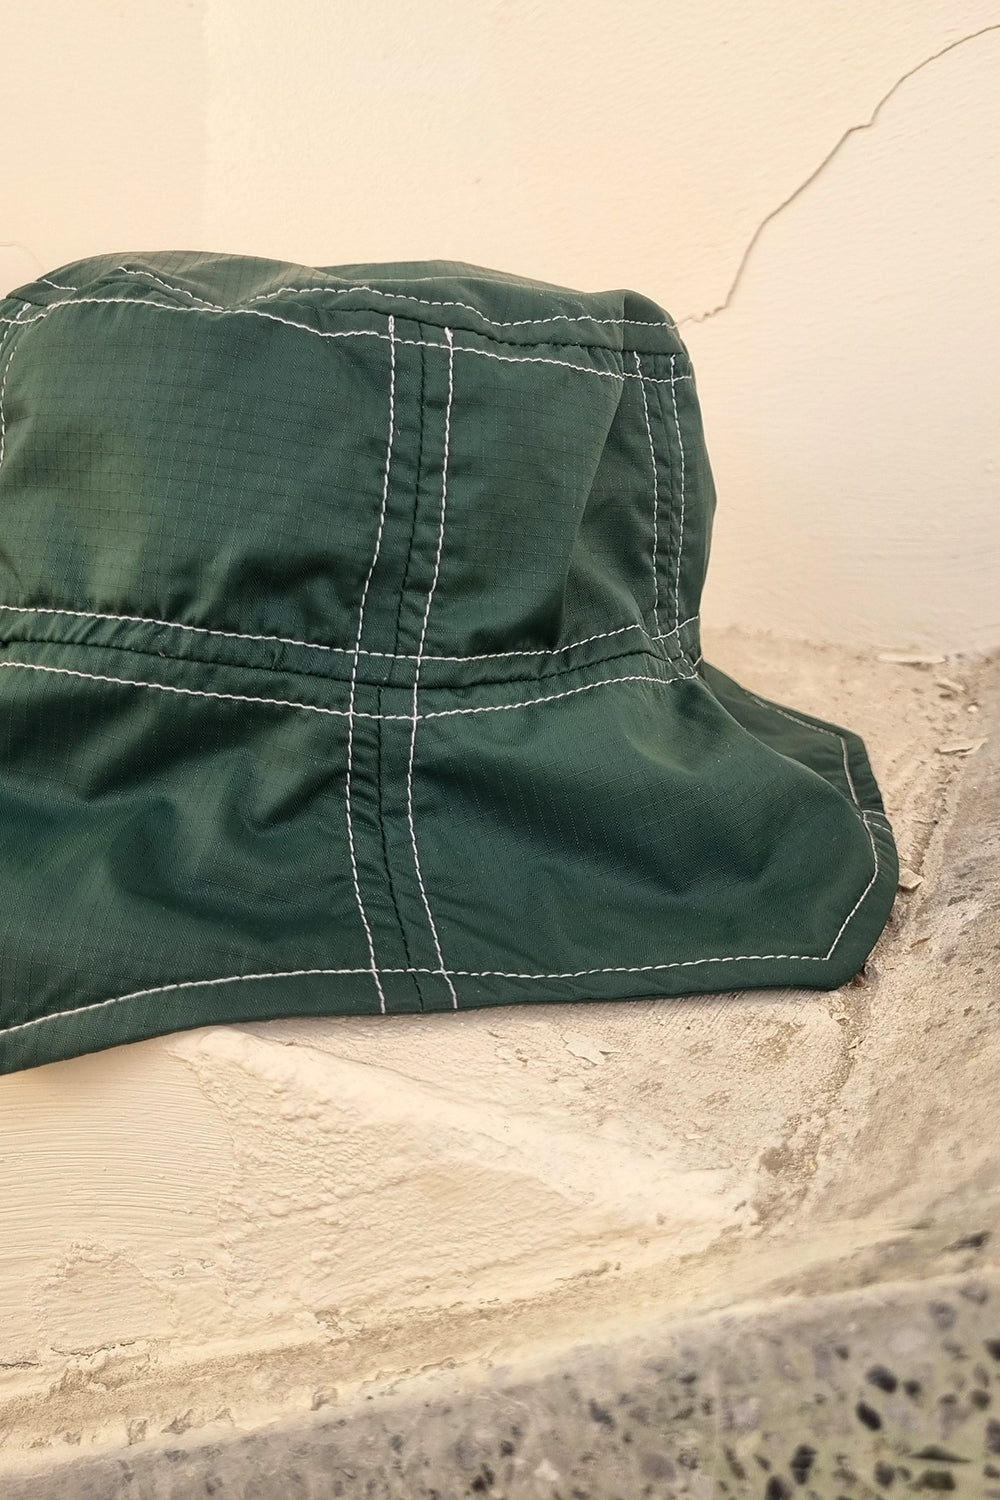 1800 Gallons LIMITED Upcycled Green Raincoat Hexy Hat